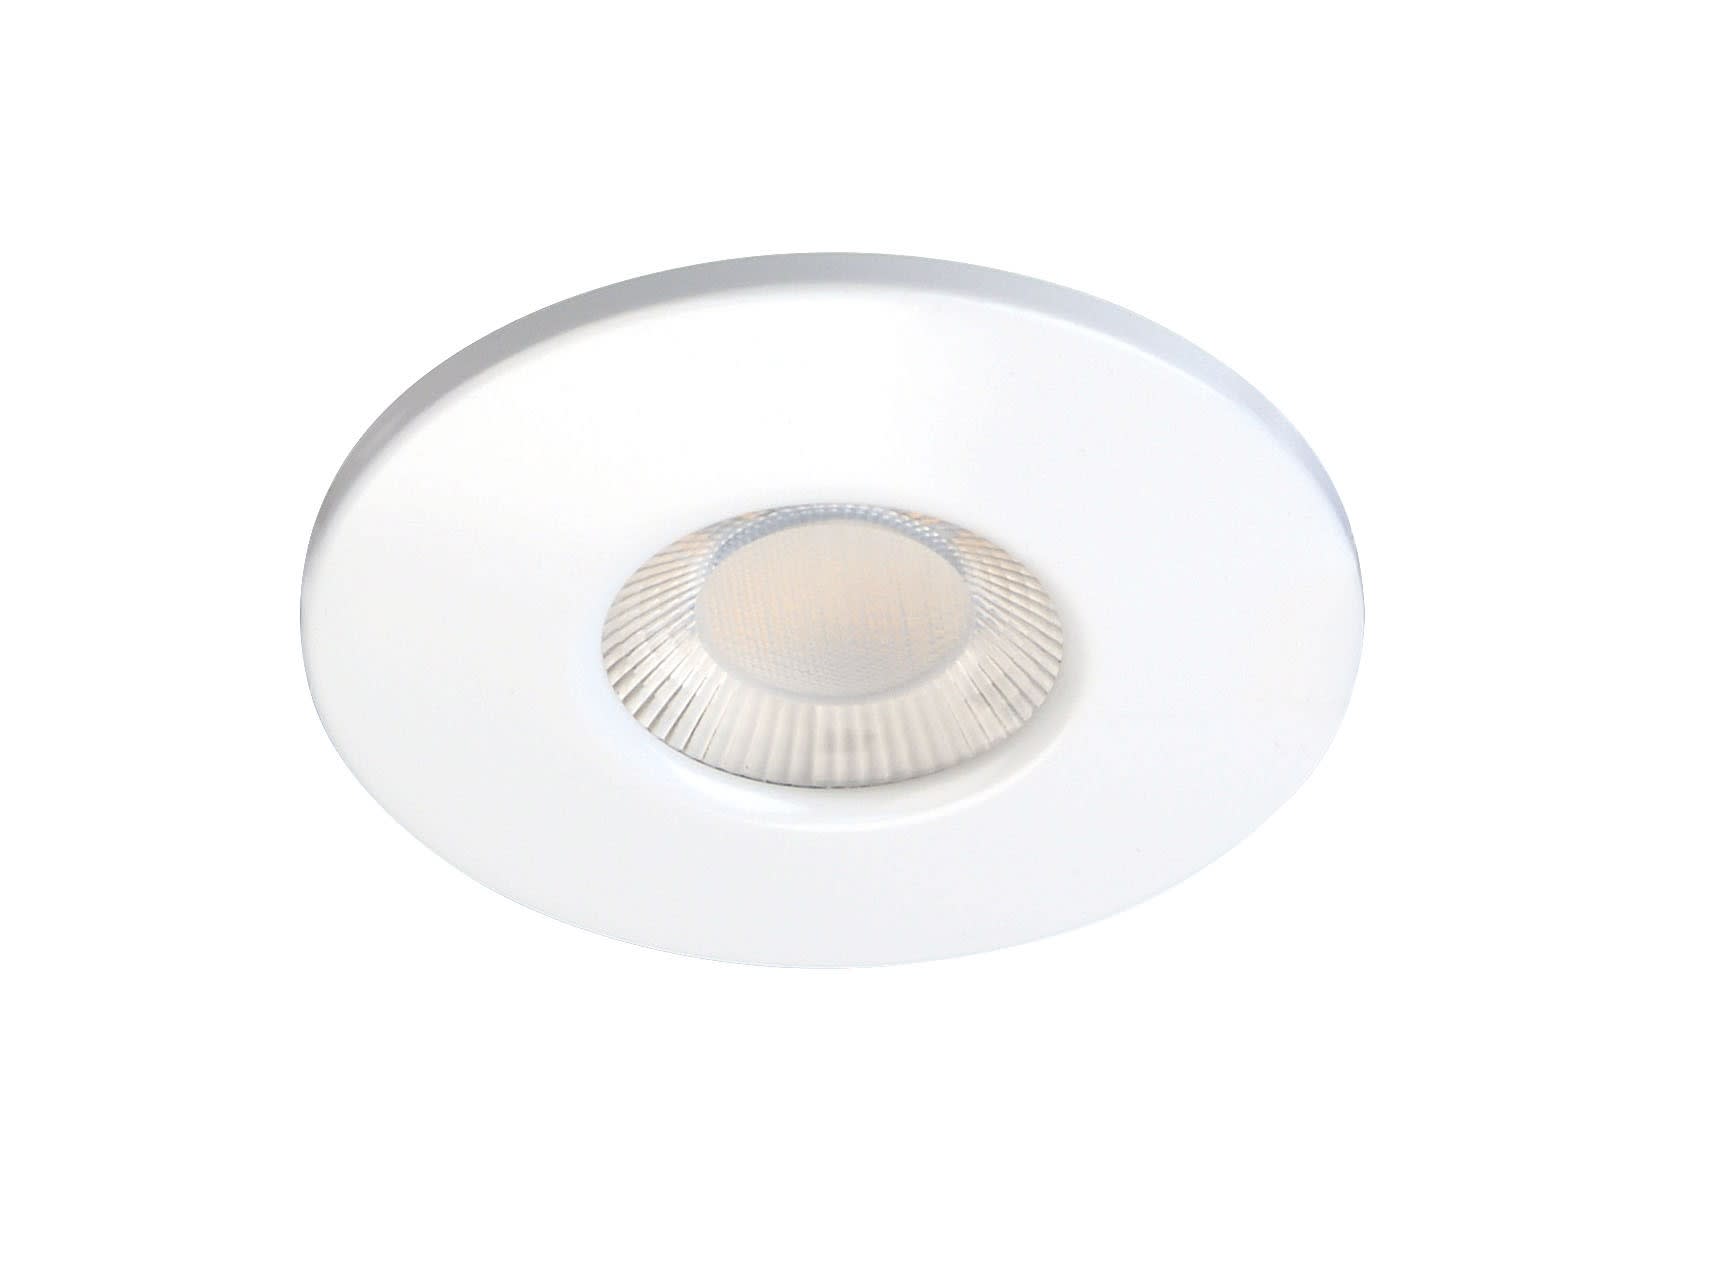 Aric - EF6 - Enc. IP20-65 LED 7W 55 600lm 3000-4000K (CCT), recouvrable et dimmable